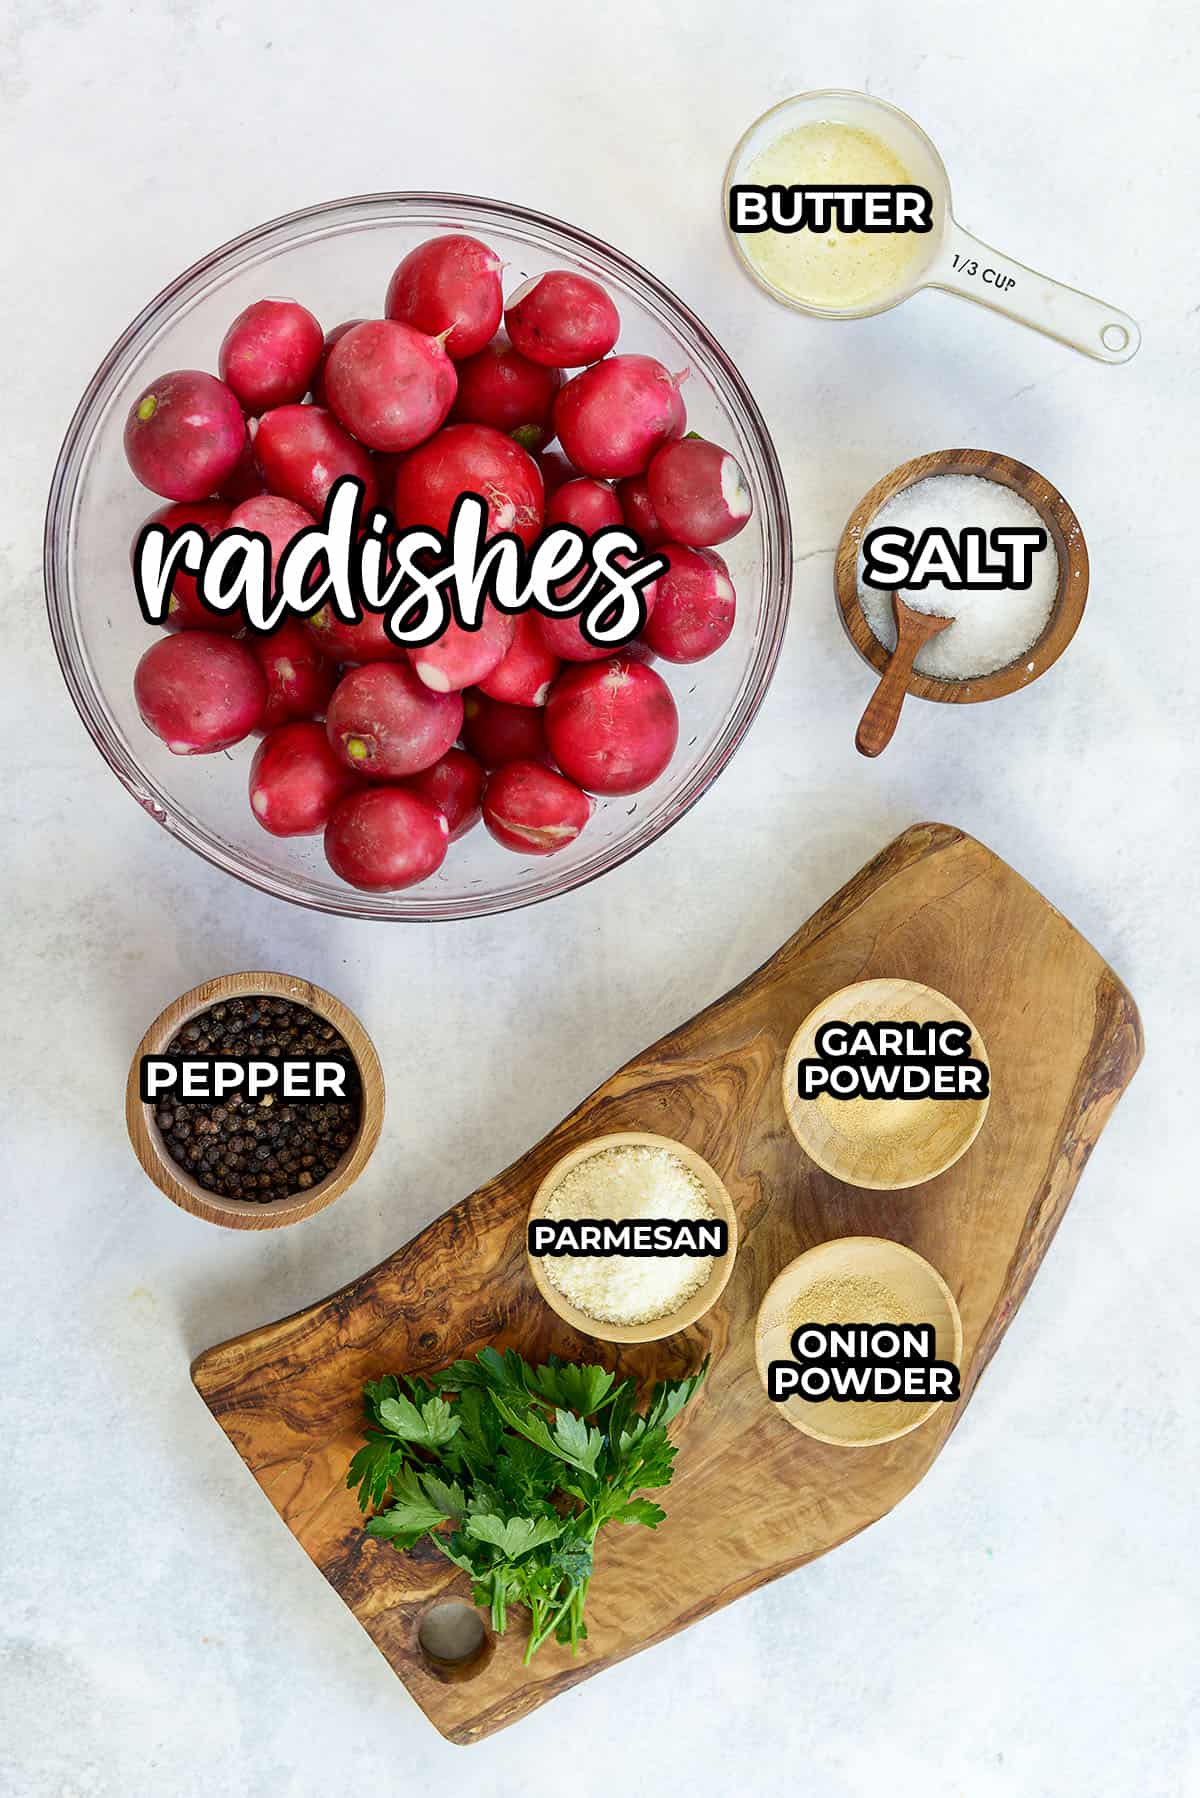 ingredients for roasted radishes.